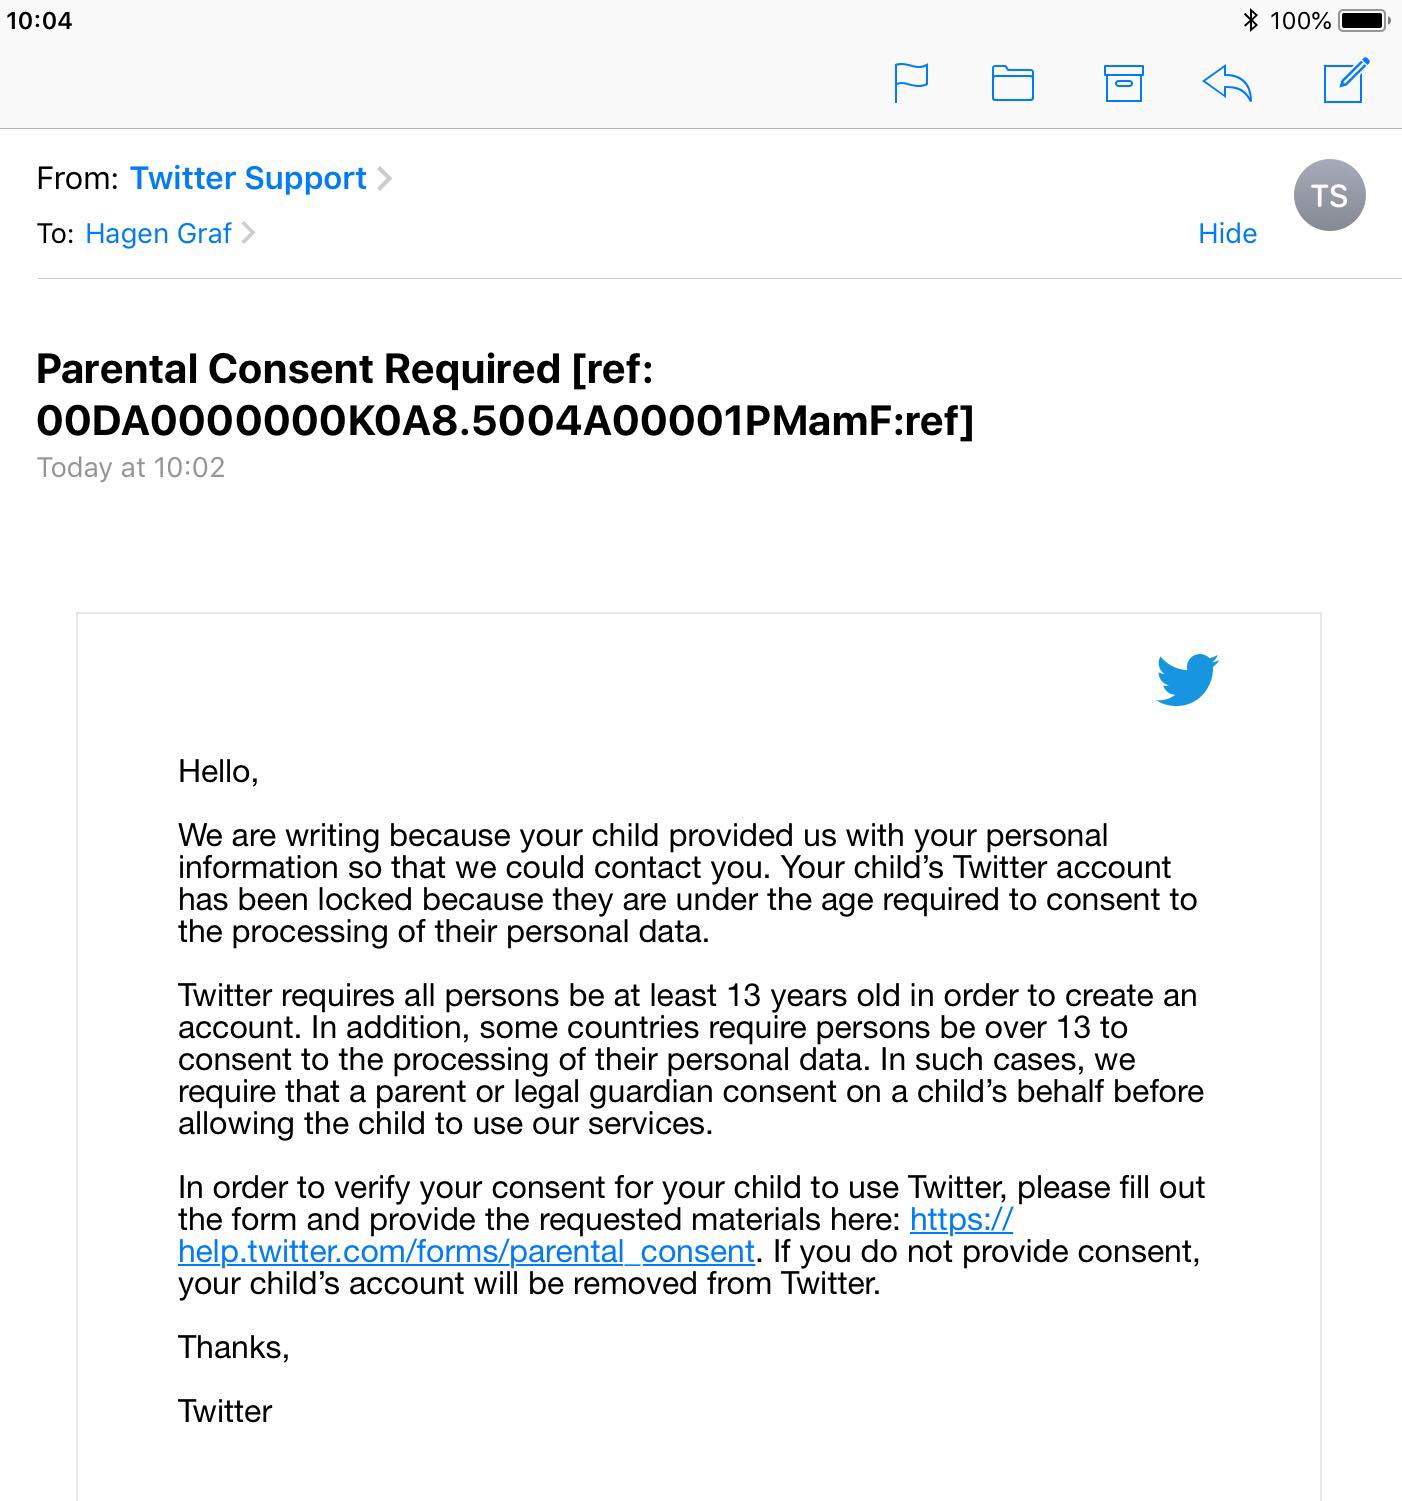 Email from Twitter